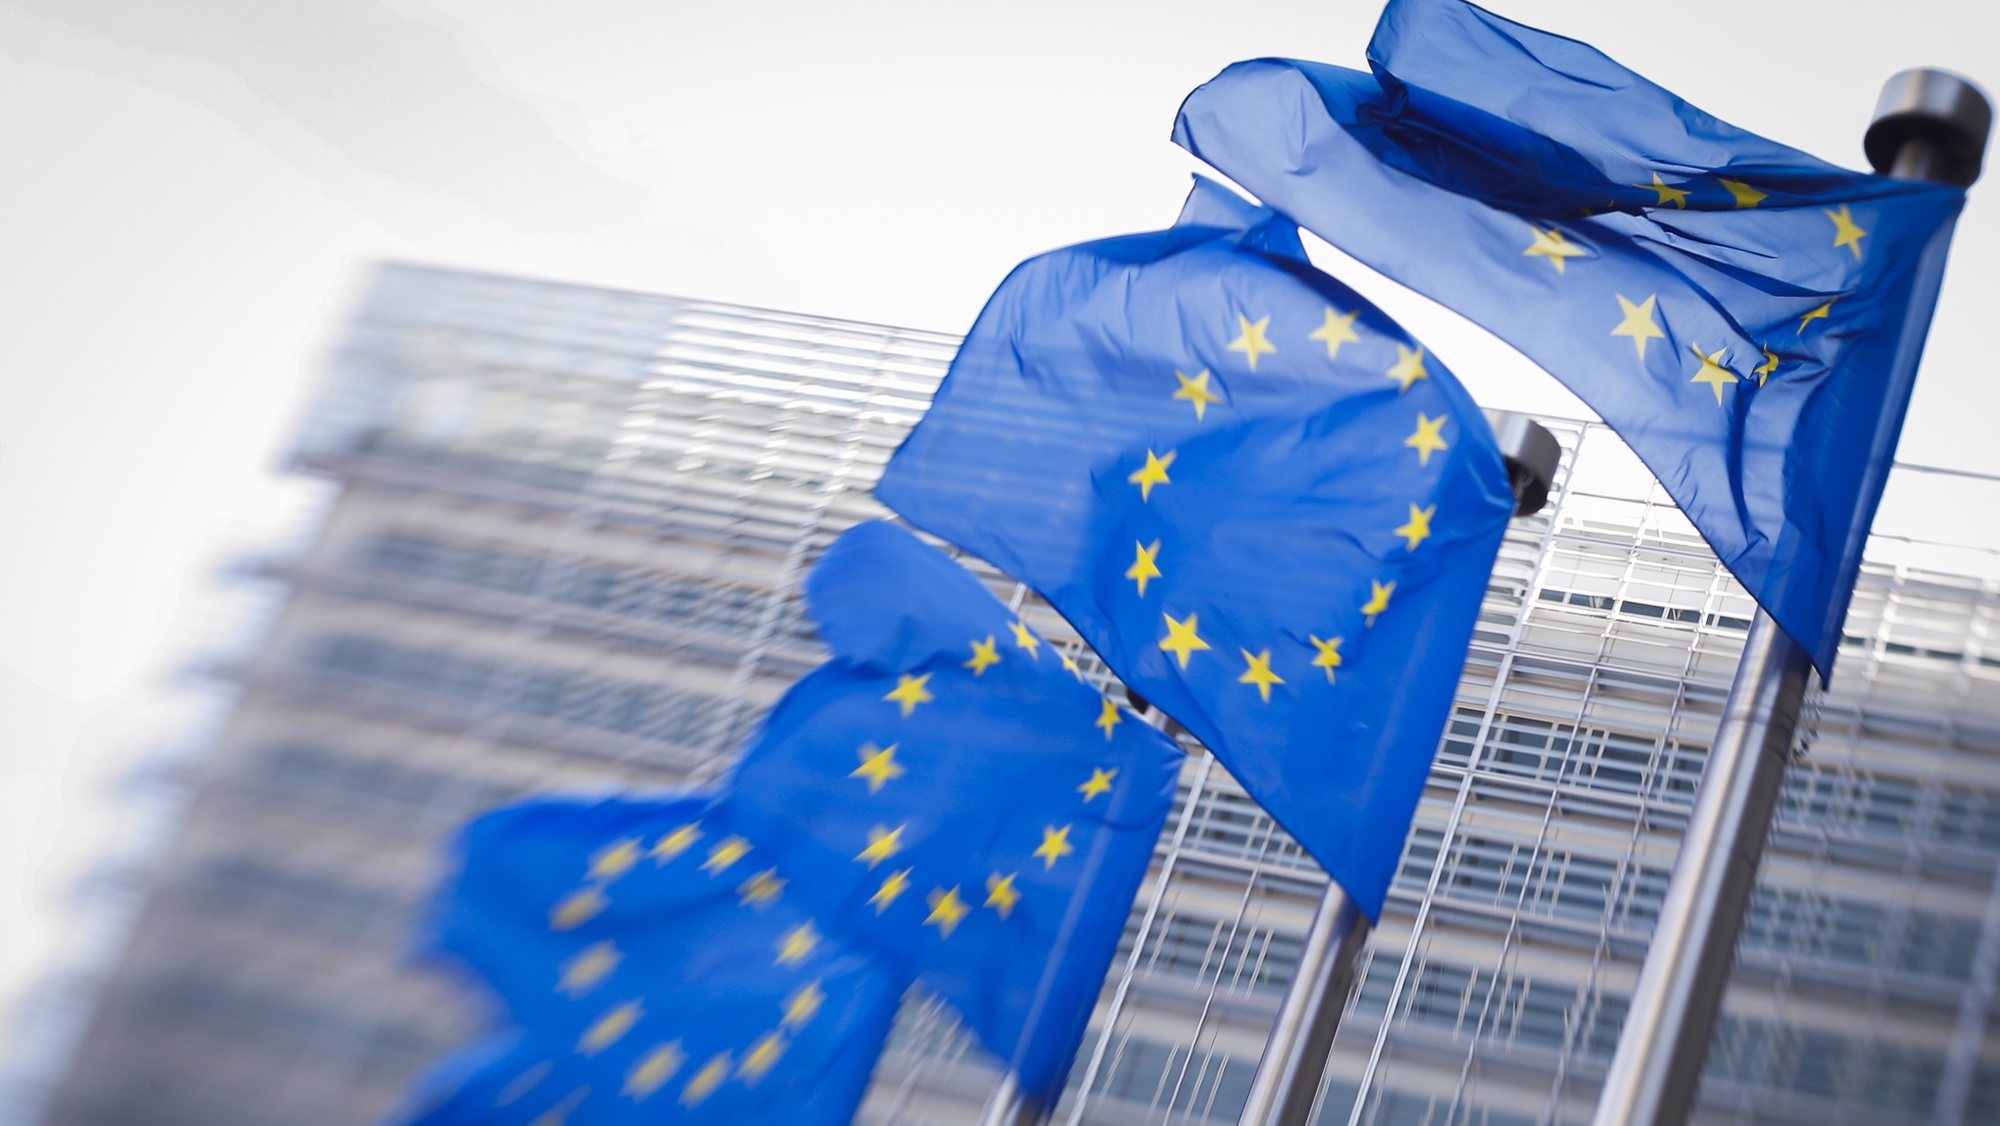 epa07239707 (FILE) - European flags in front of European commission headquarters in Brussels, Belgium, 26 June 2018 (reissued 19 December 2018). According to a report by the New York Times, hackers have allegedly intercepted communications of European Union diplomatic staff for several years.  EPA/OLIVIER HOSLET